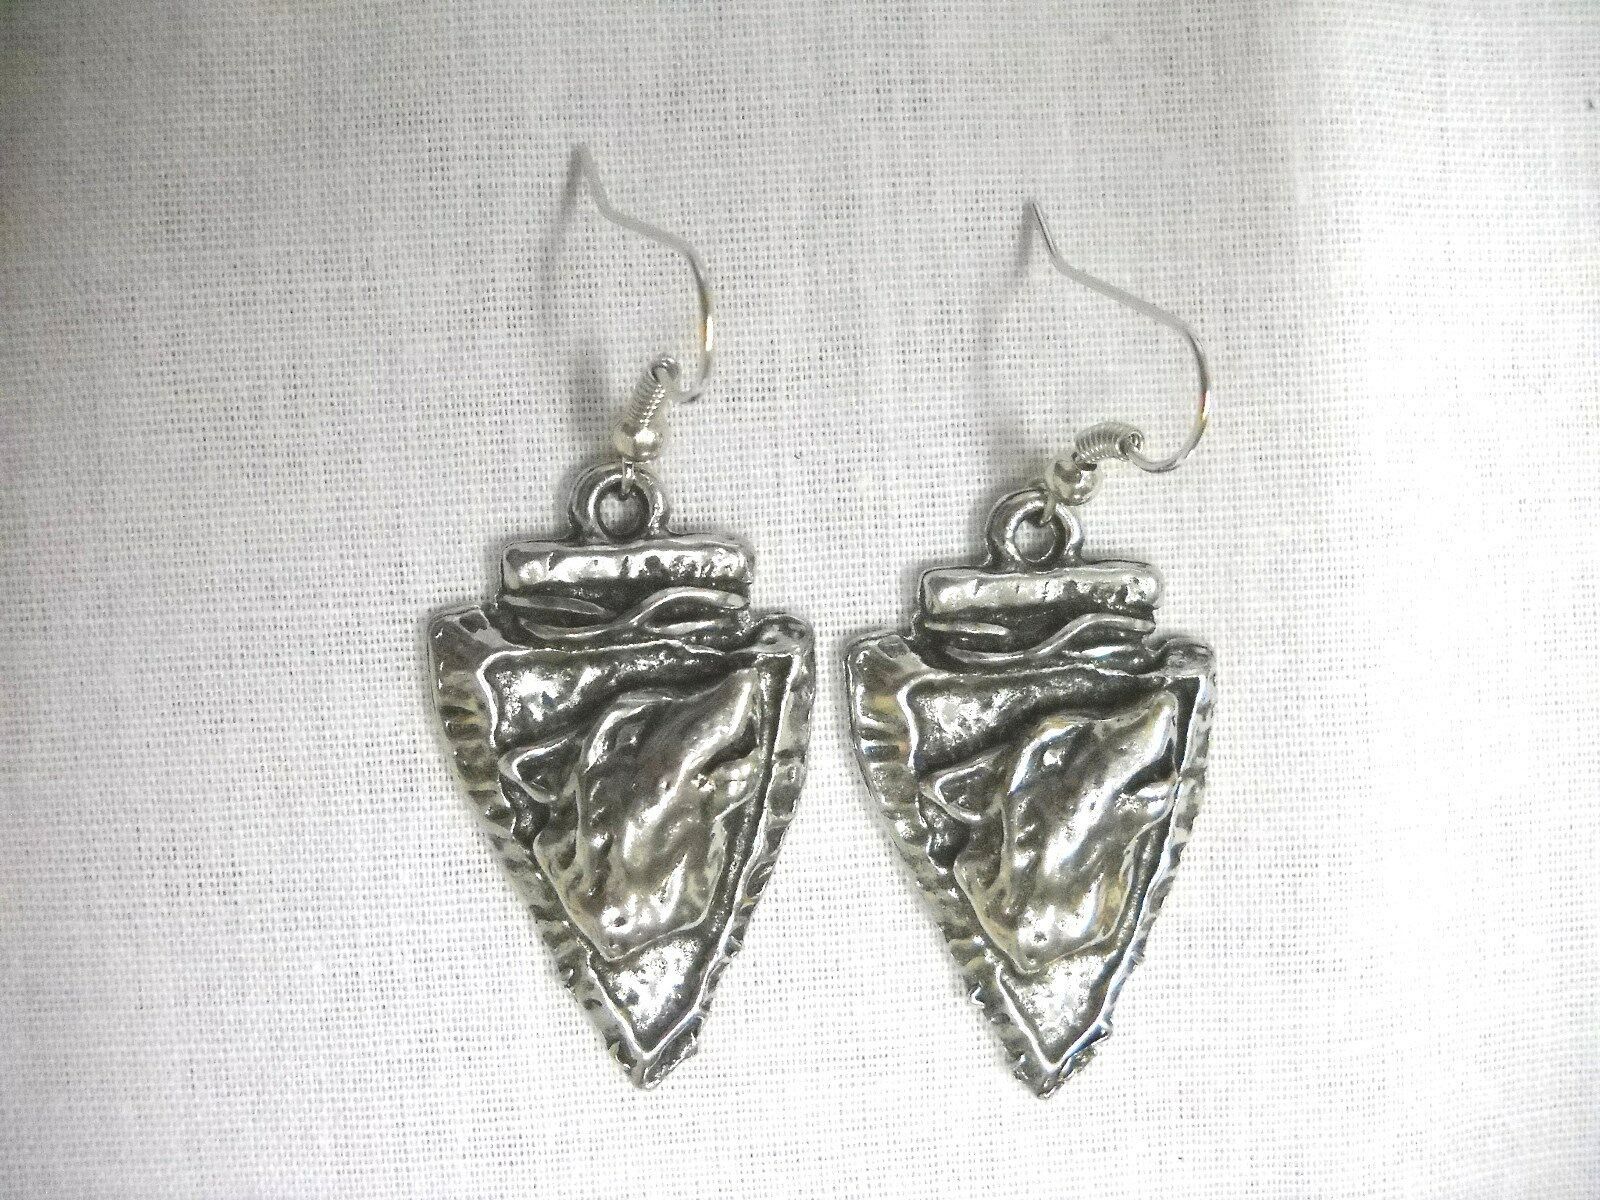 Primary image for NEW AMERICAN TRIBAL SPIRIT WOLF HEAD ARROWHEAD PEWTER FULL PENDANT SIZE EARRINGS